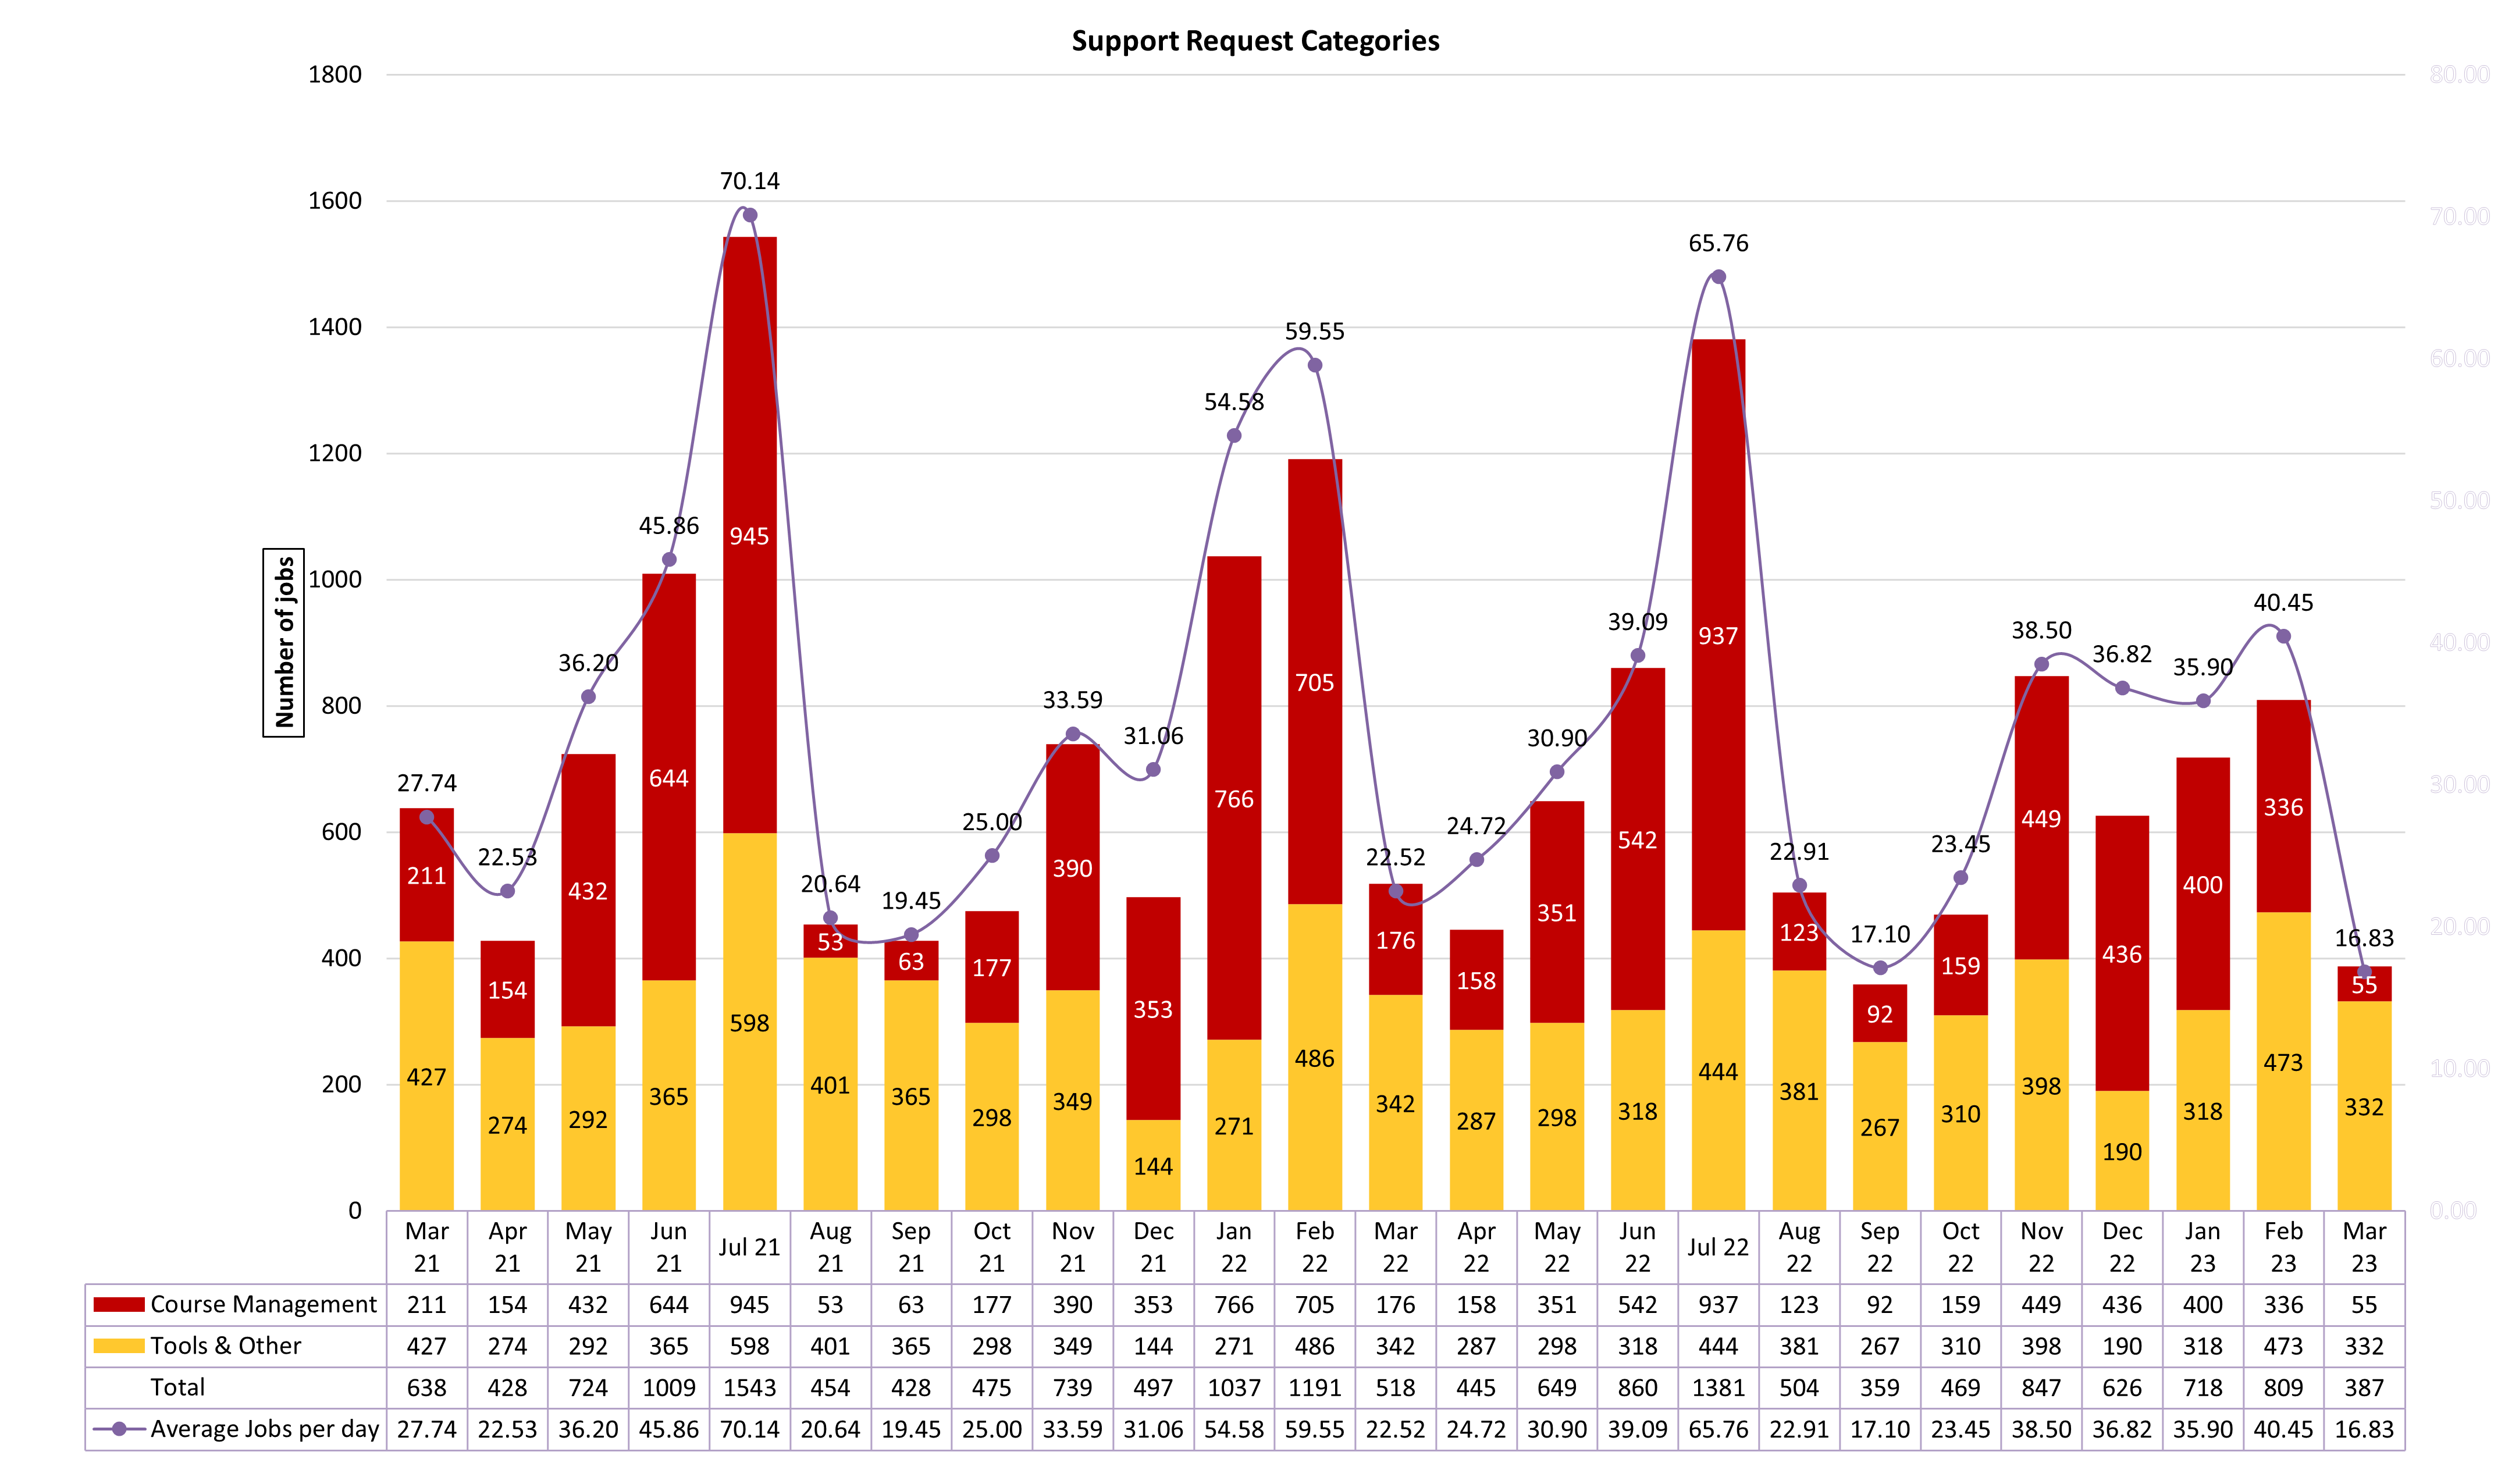 Chart of Support Request Categories from March 2021 to March 2023